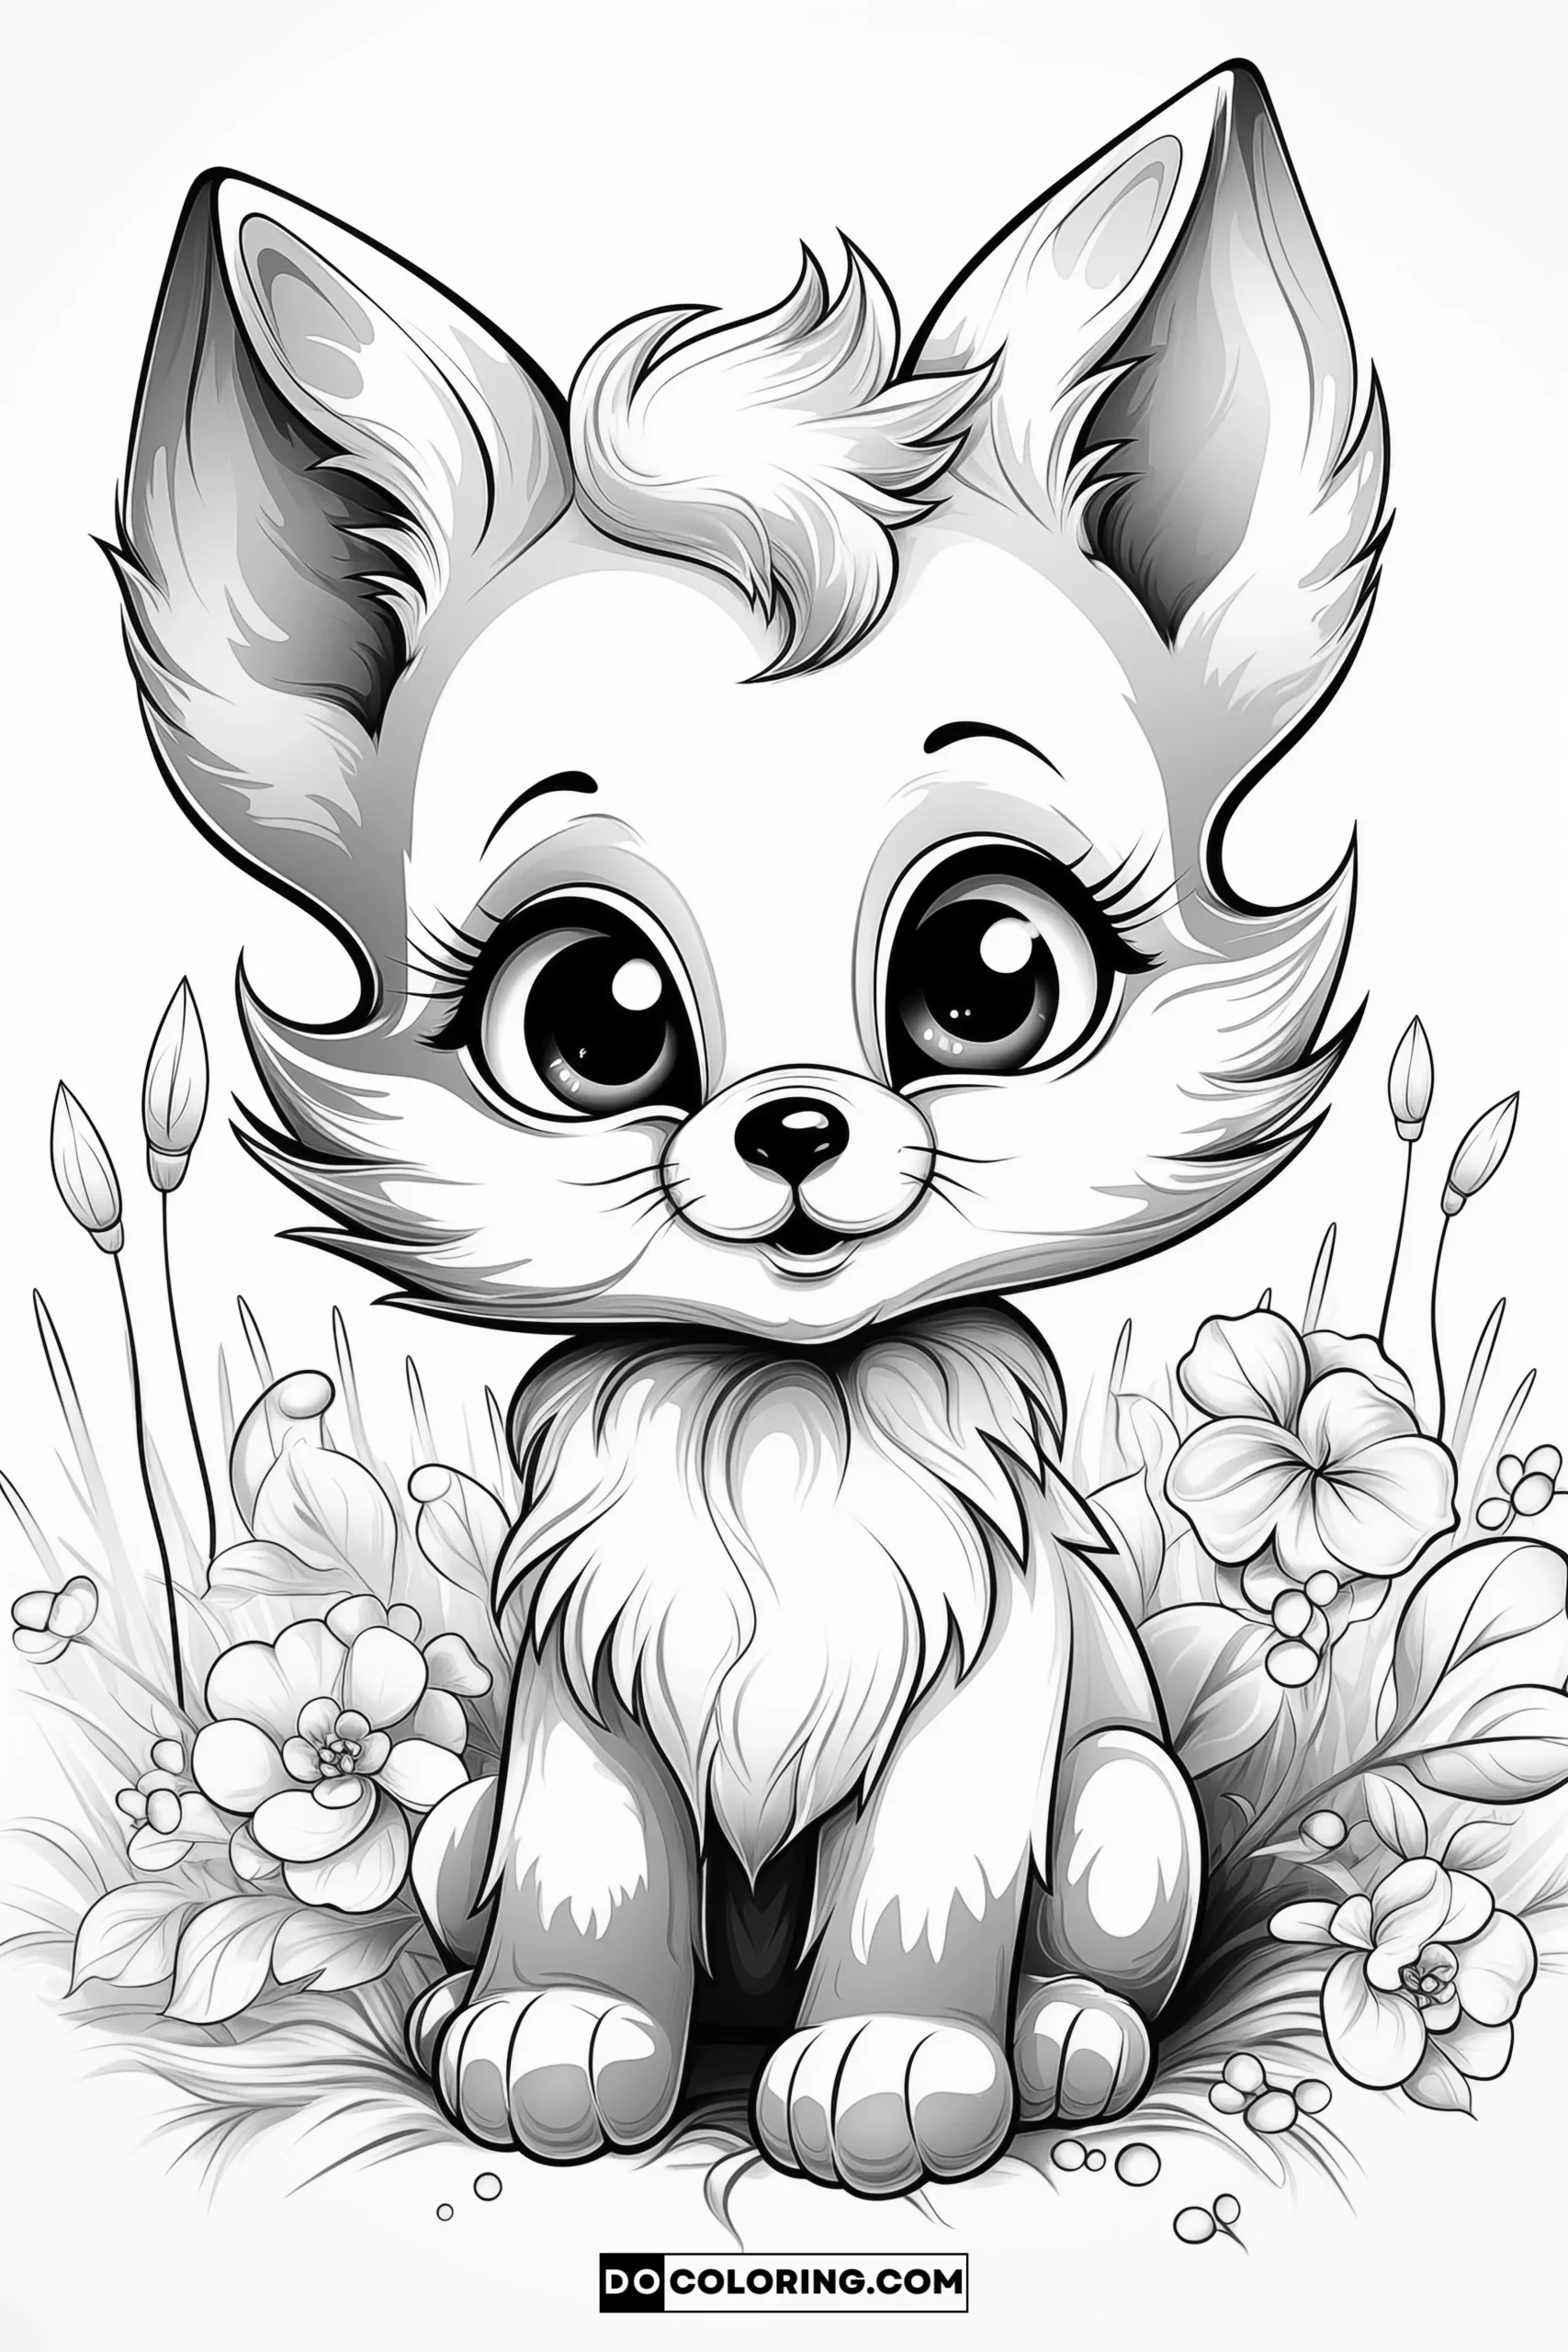 A professionally crafted coloring page featuring a happy and fluffy baby fox for adults.